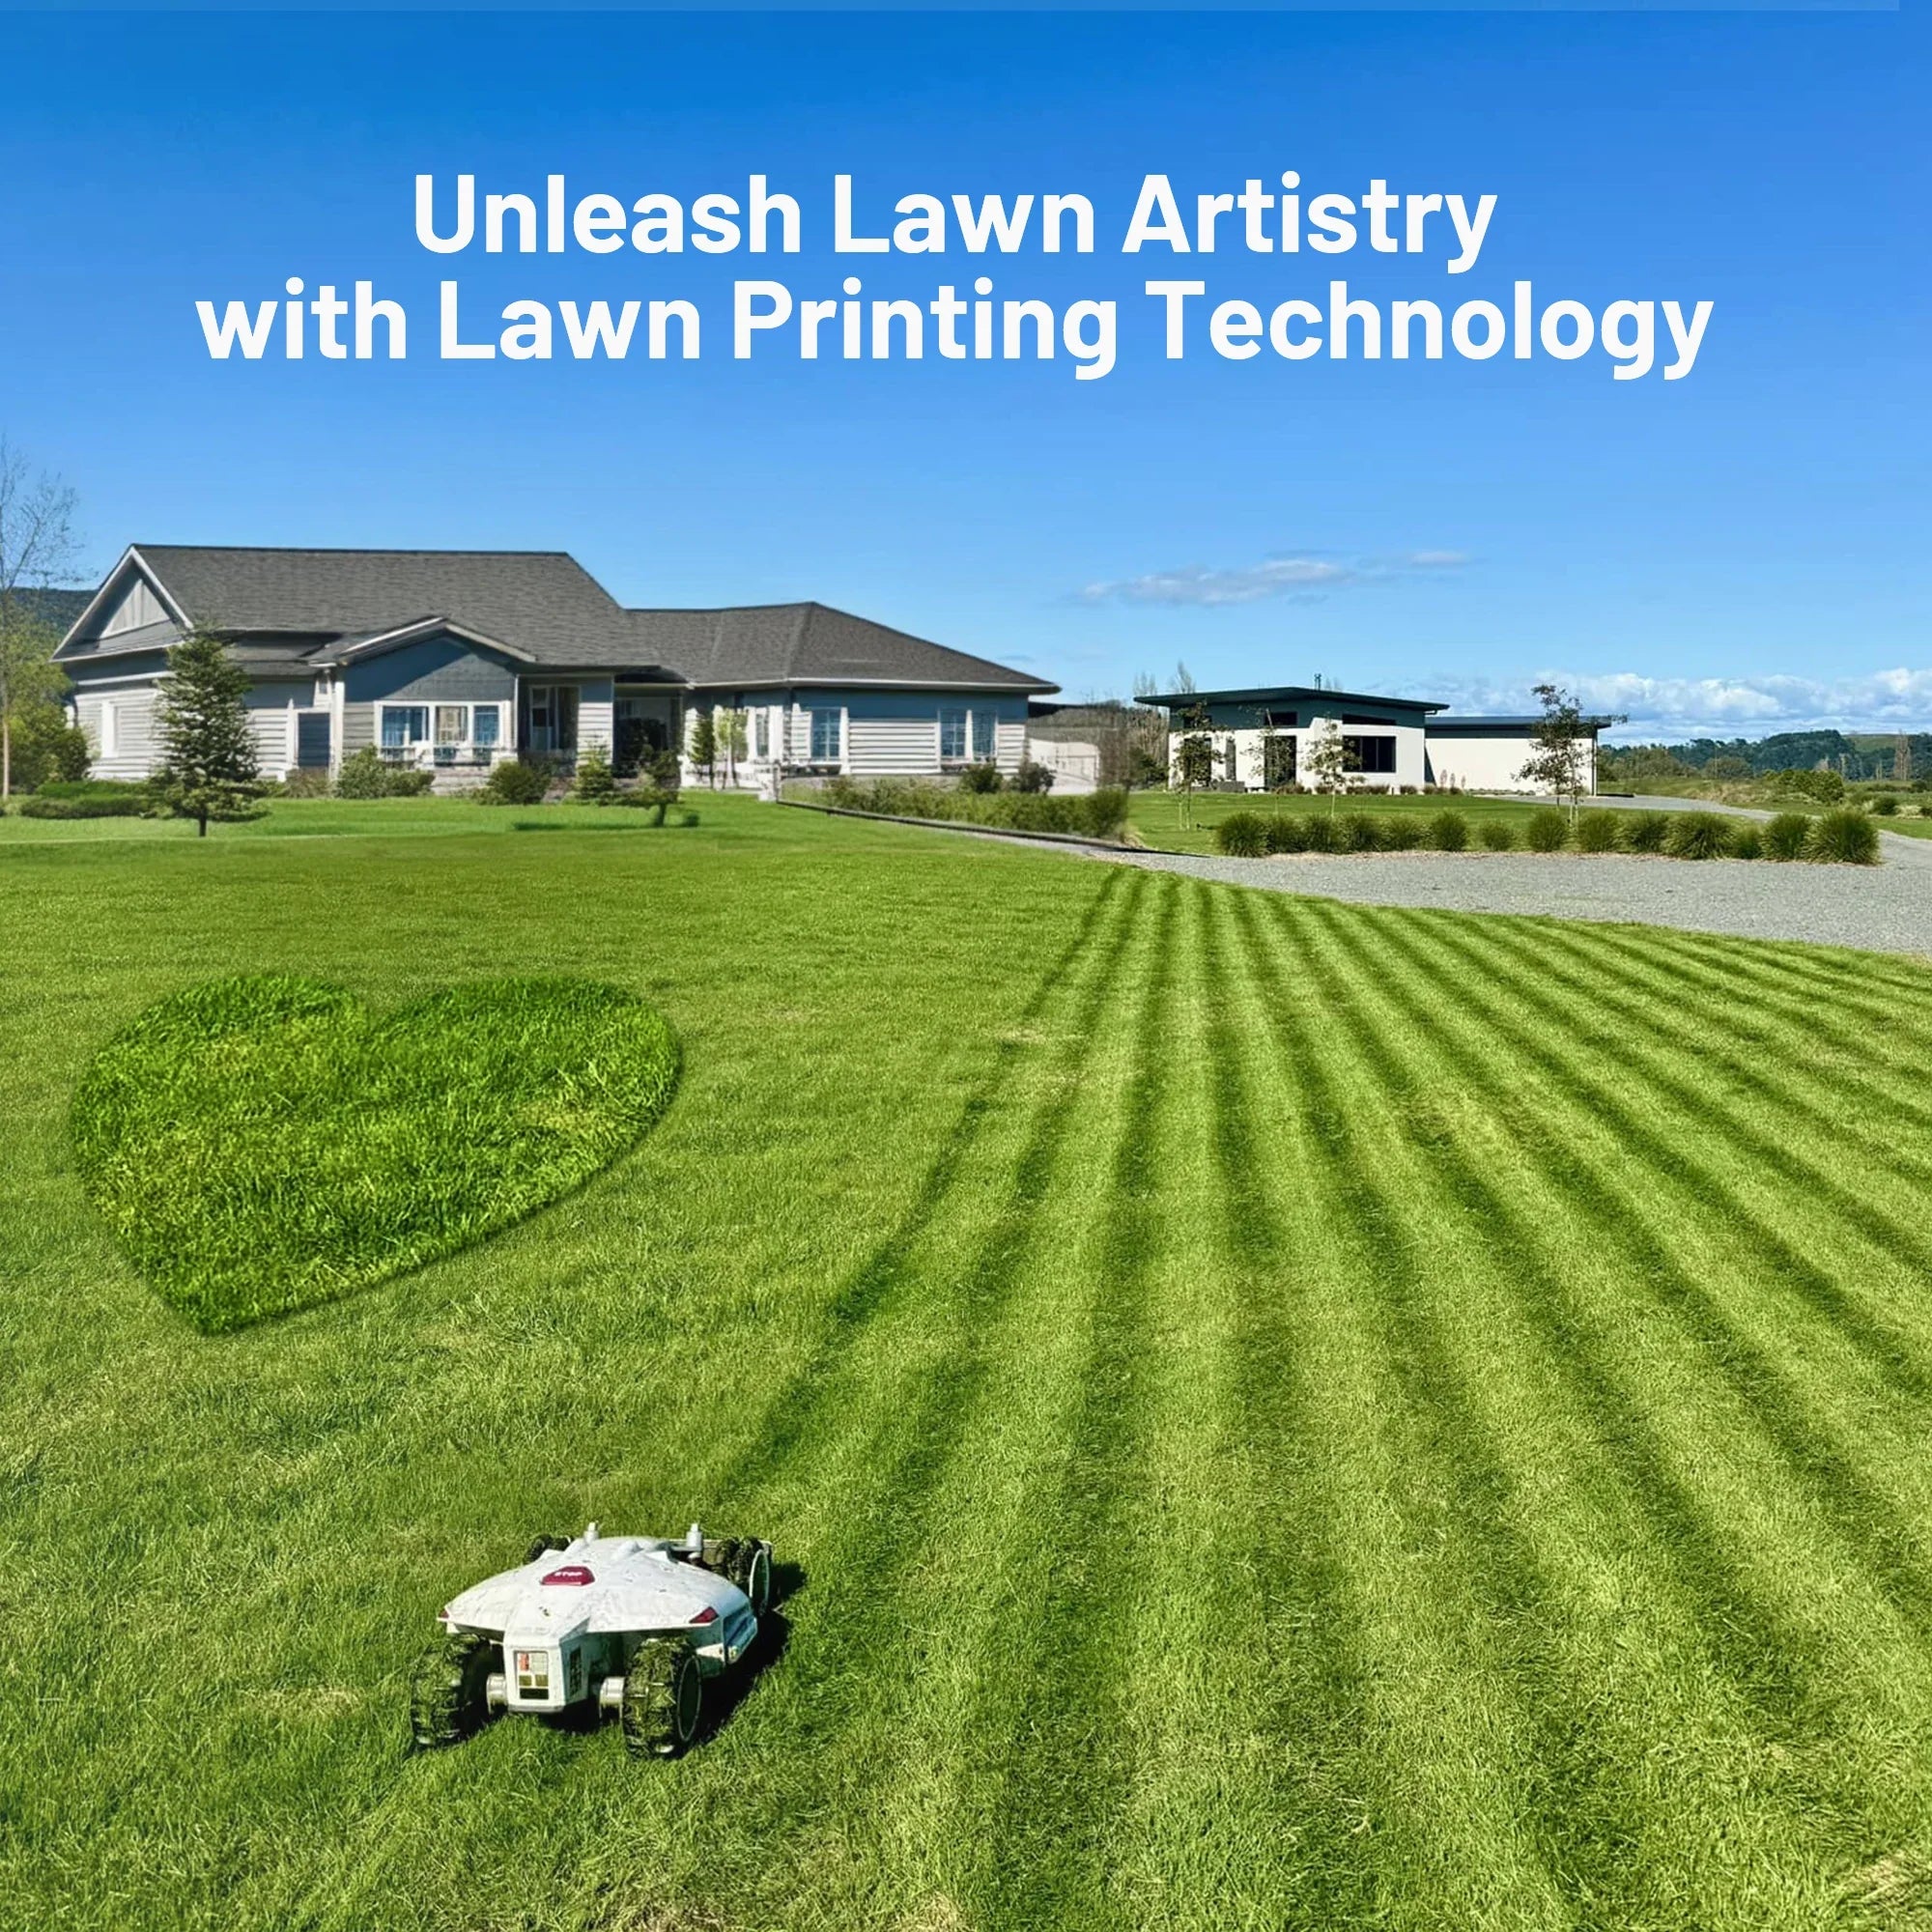 Mammotion LUBA 2 robot lawn mower - Unleash Lawn Artistry with Lawn Printing Technology